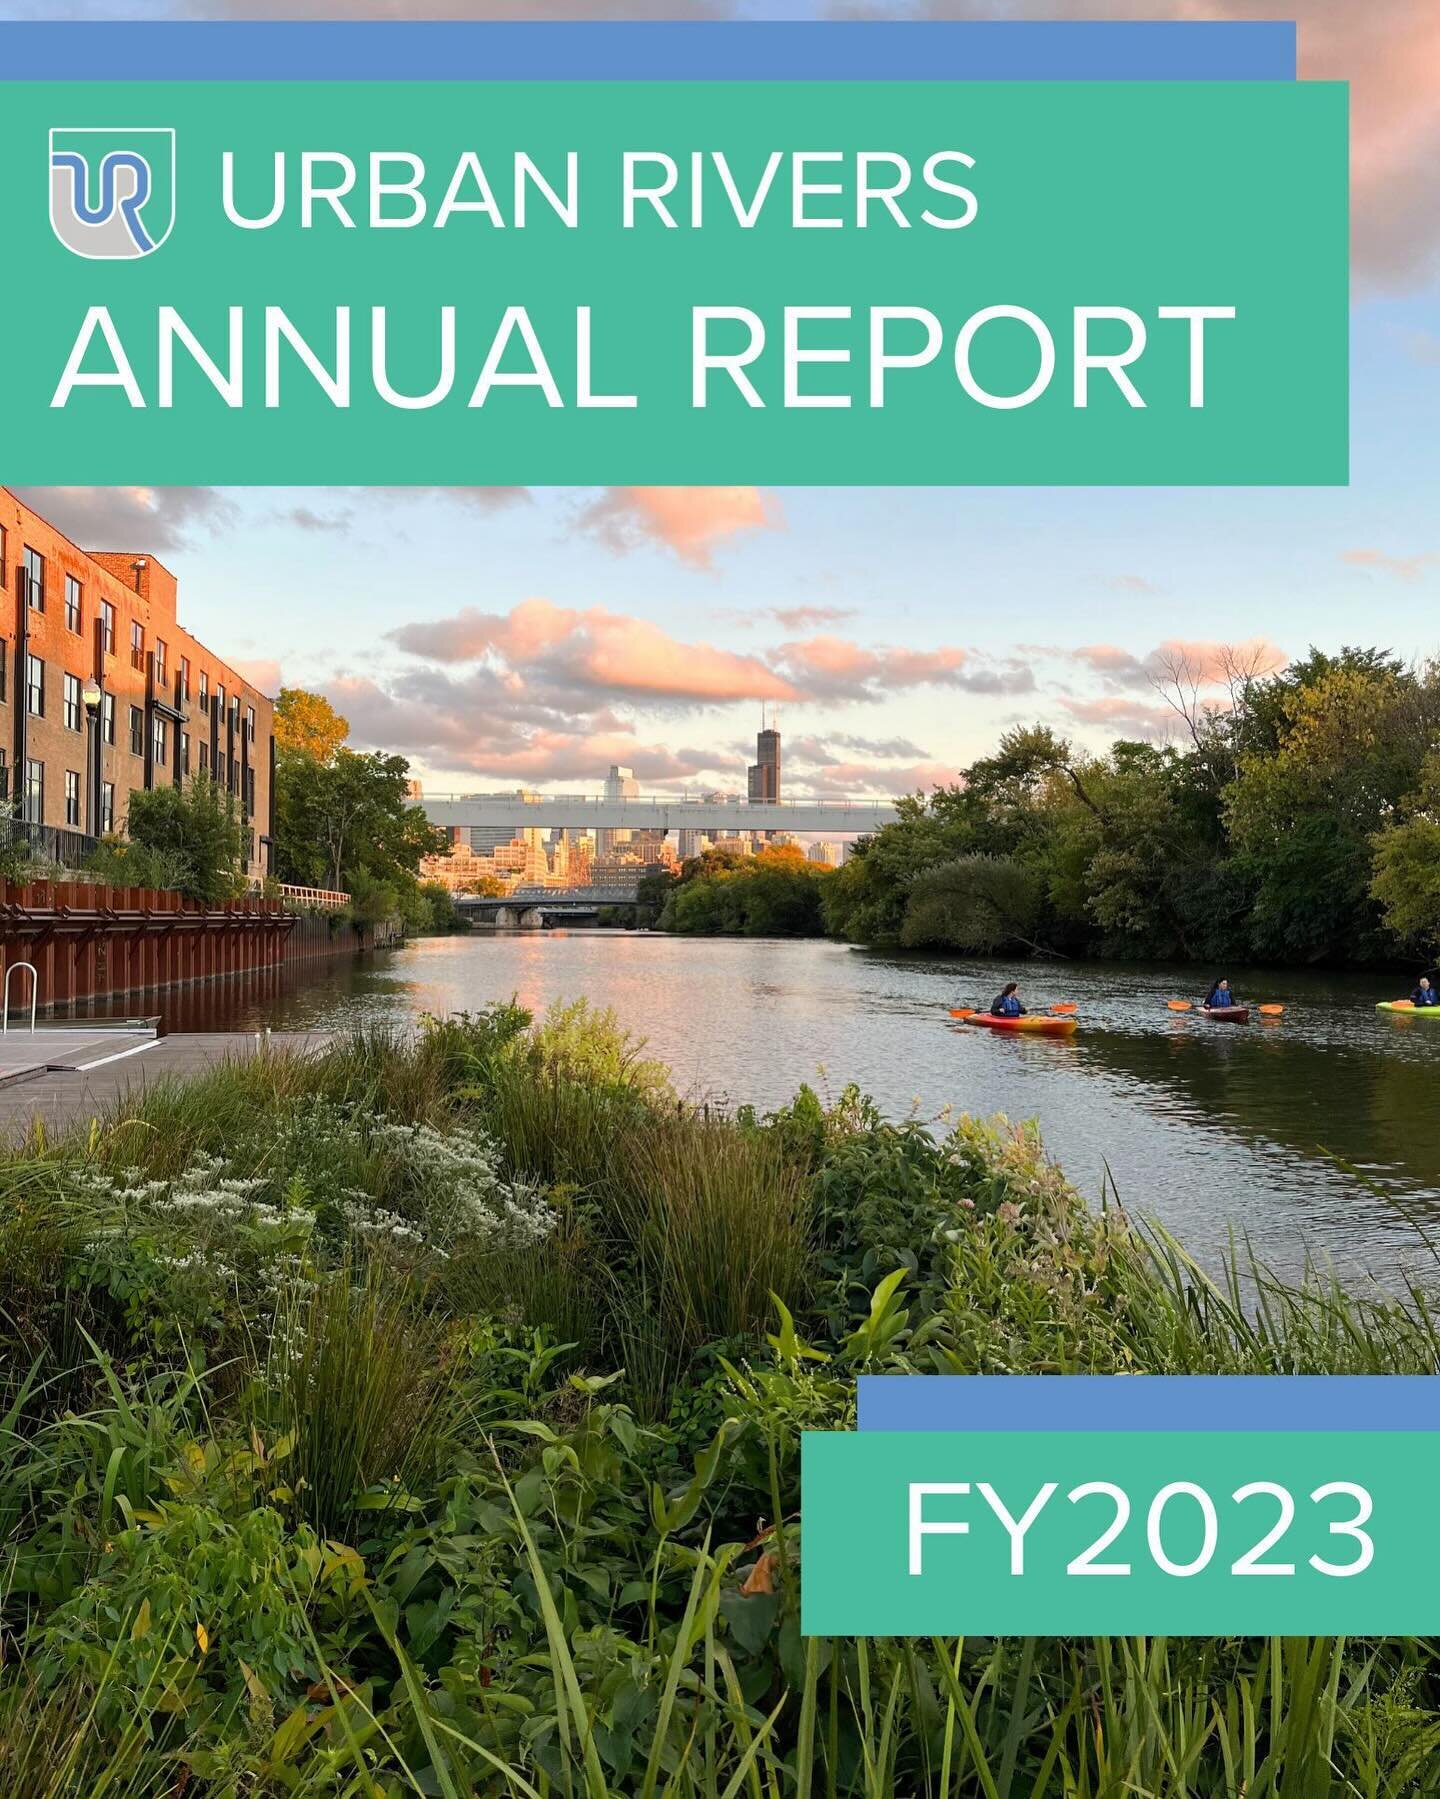 The 2023 Annual Report is here! It was a year of activation and community-building for Urban Rivers - read all about it under &ldquo;annual reports&rdquo; on our website (link in bio)! 

#urbanrivers #wildmile